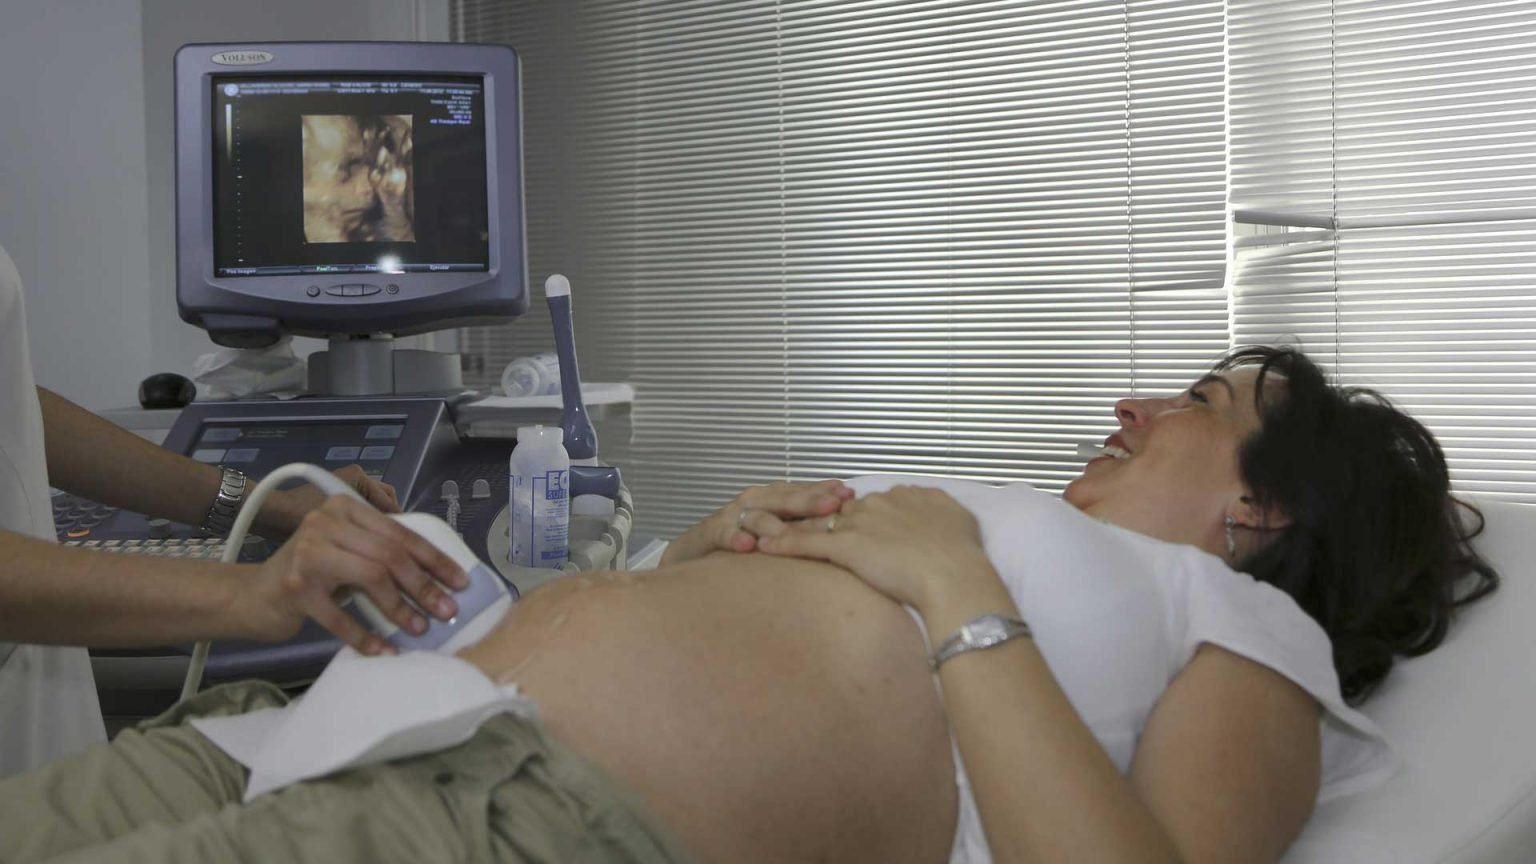 Key-Trends-That-Are-Shaping-the-Ultrasound-Industry-on-FreeThoughtsPortal